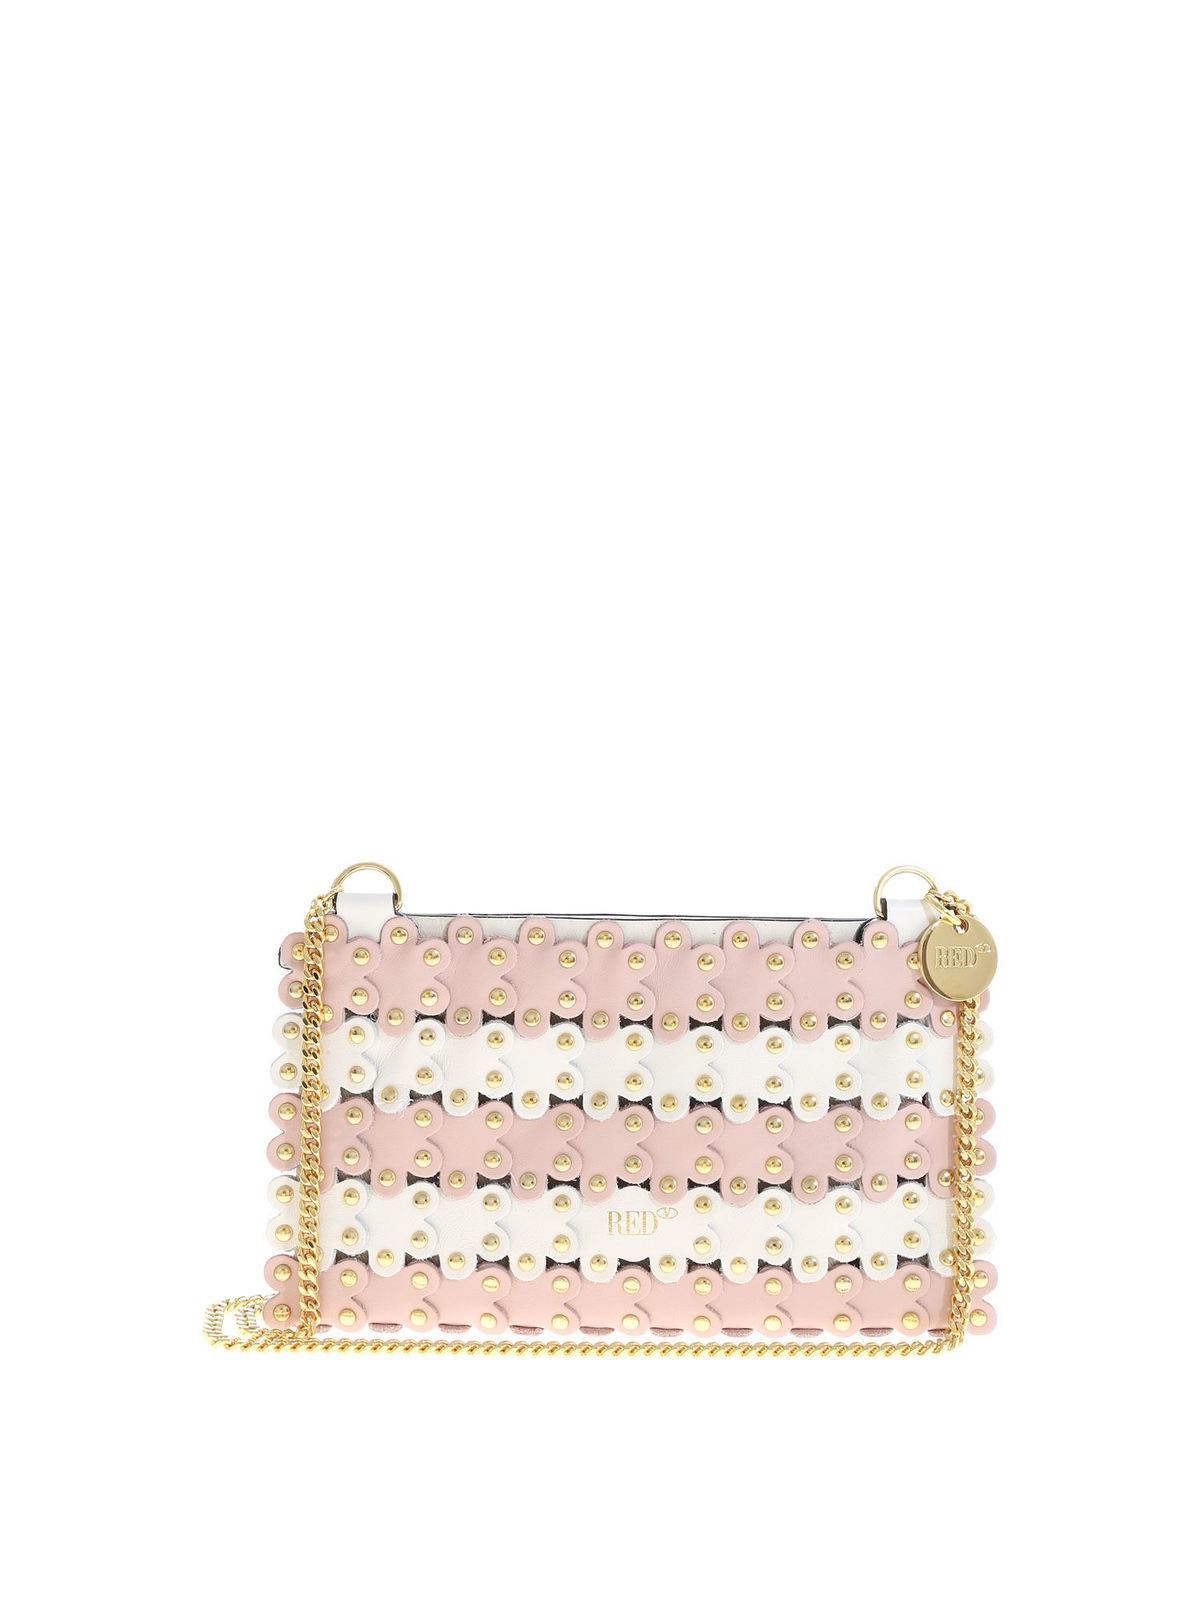 Valentino Red - Flower Puzzle clutch bag in pink and white - cross body ...